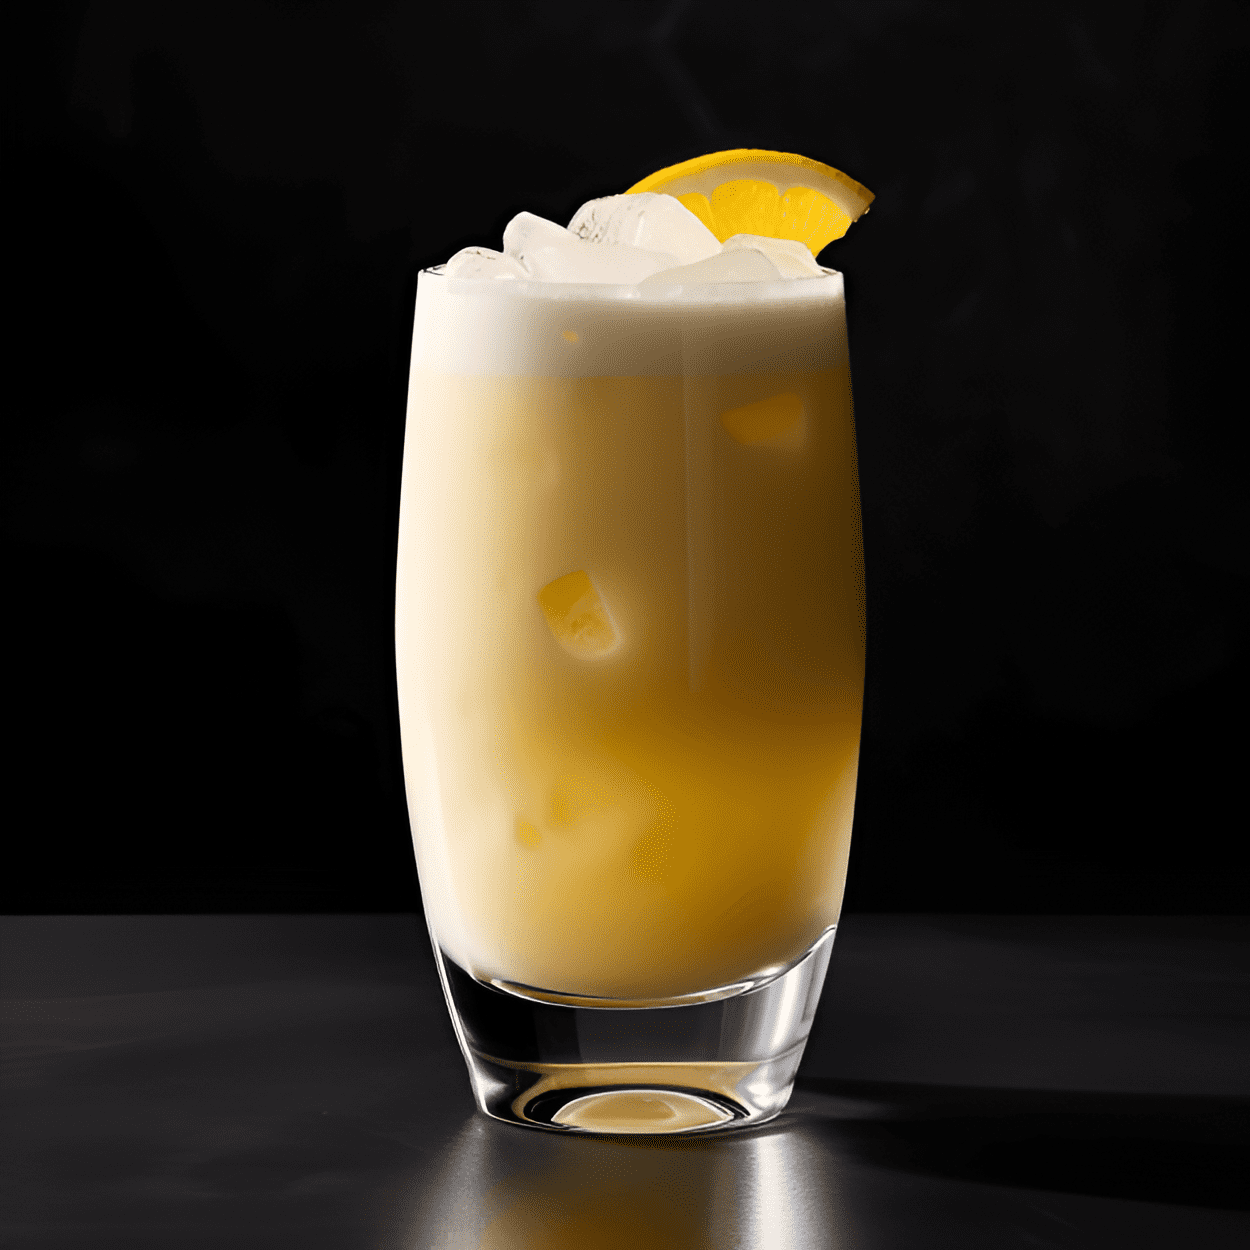 BBC Cocktail Recipe - The BBC cocktail is a creamy, sweet, and fruity cocktail. It has a strong banana flavor, complemented by the smoothness of Bailey's and the tropical hint of coconut. It's like a dessert in a glass, with a velvety texture and a rich, indulgent taste.